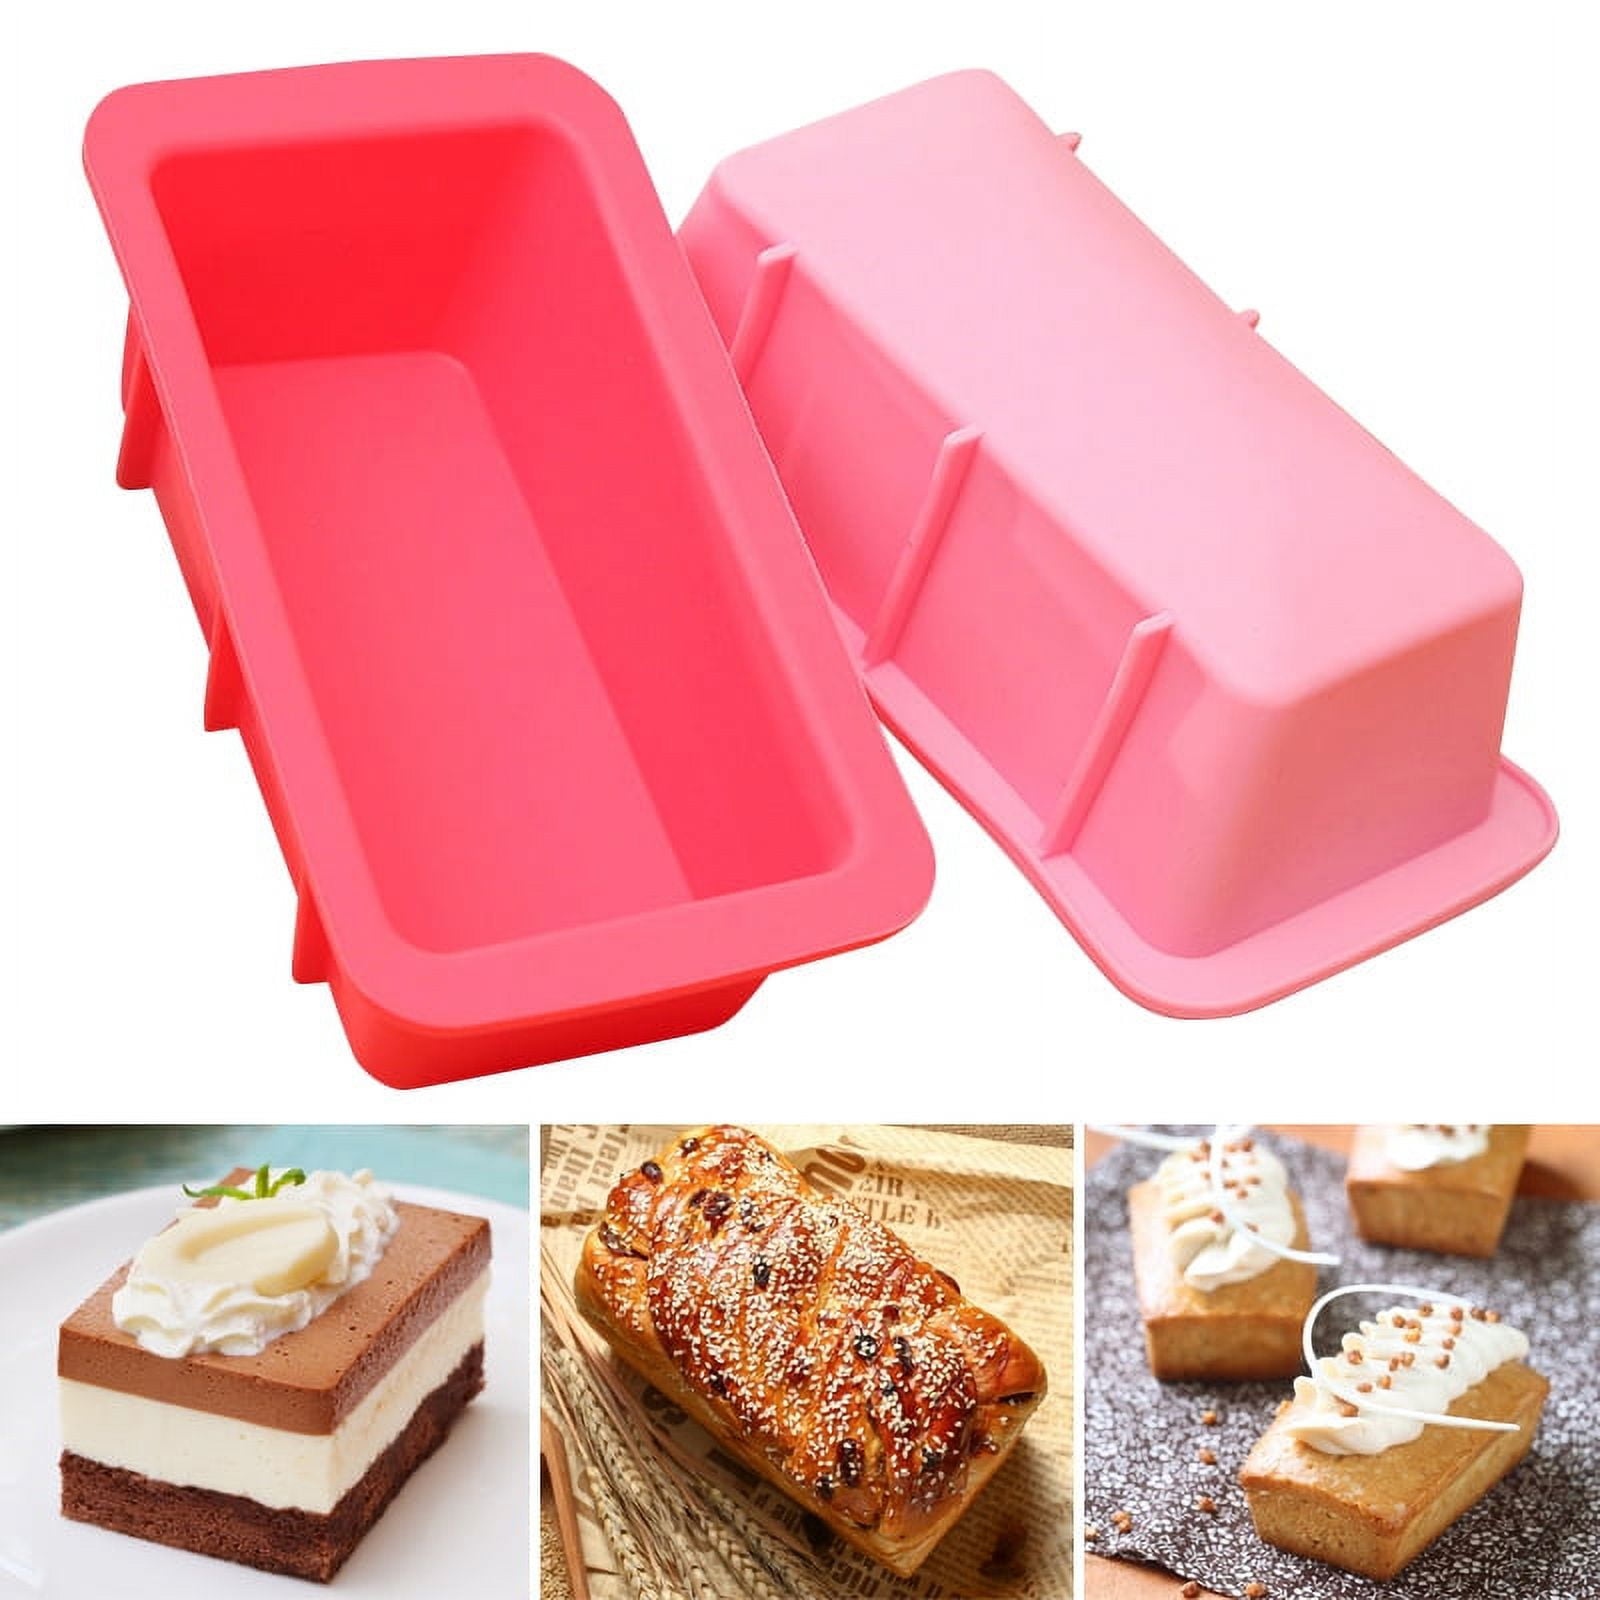 Rectangular Bread Pan Classic Fluted Loaf Pan Silicone Toast Baking Pan  Cake Mould Toast Baking Tray Cake Bread Bakeware Tools - AliExpress